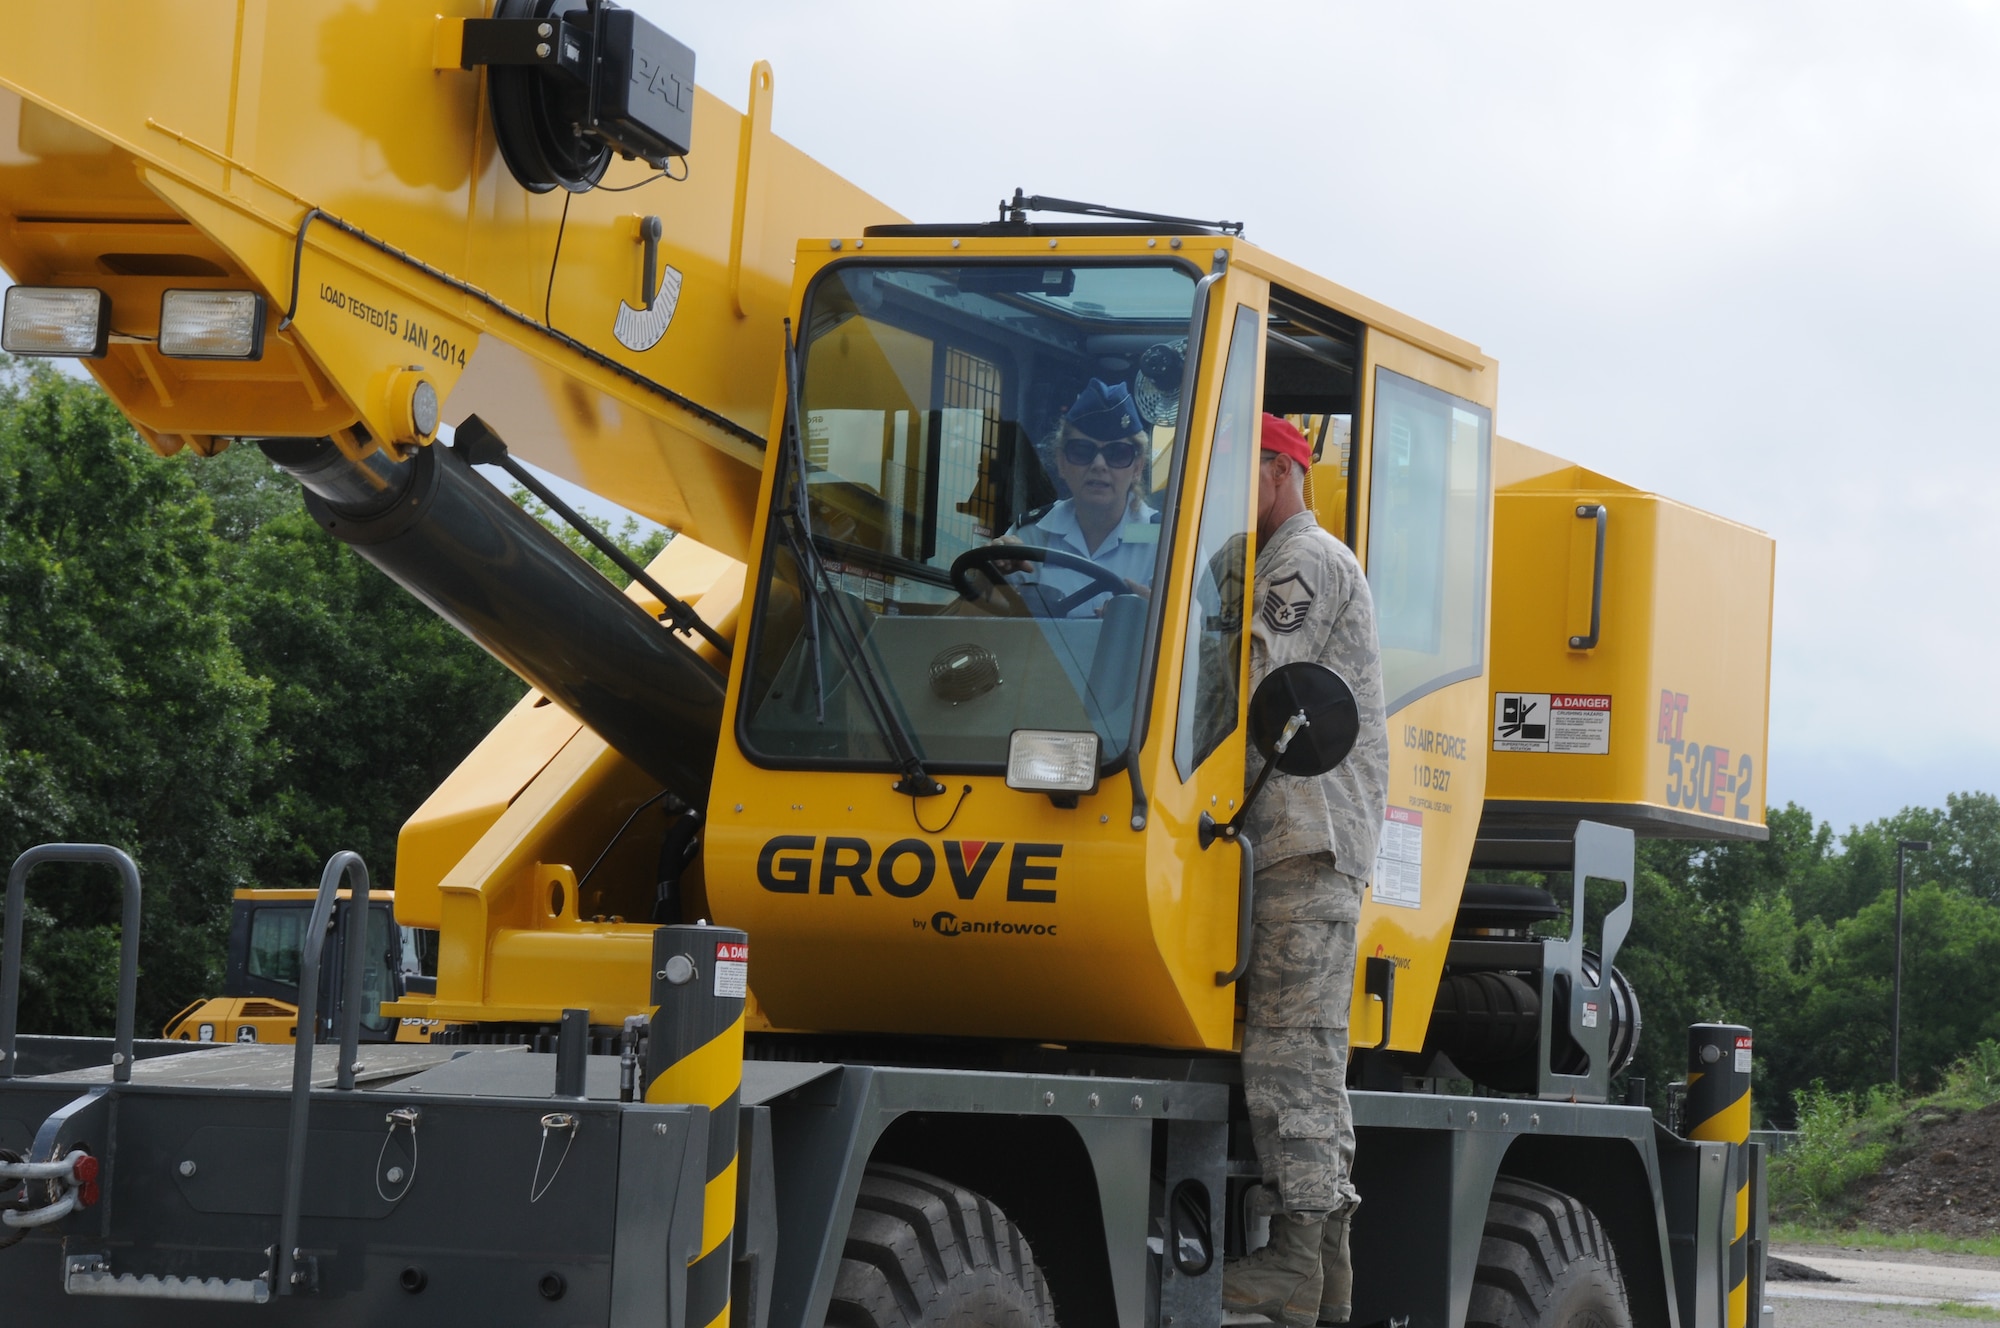 Lt. Col. Tenise Gardner, 188th Mission Support Group commander, operates the Grove 30-ton rough terrain mobile crane while Master Sgt. Robert Haag directs her at Ebbing Air National Guard Base, Fort Smith, Arkansas. The crane’s capabilities were showcased during a tour of the 188th Civil Engineering Squadron Rapid Engineer Deployable Heavy Operational Repair Squadron Engineer (REDHORSE) Training Center. The 188th Wing has the Air National Guard’s first and only REDHORSE training center. (U.S. Air National Guard photo by Airman 1st Class Cody Martin/released)